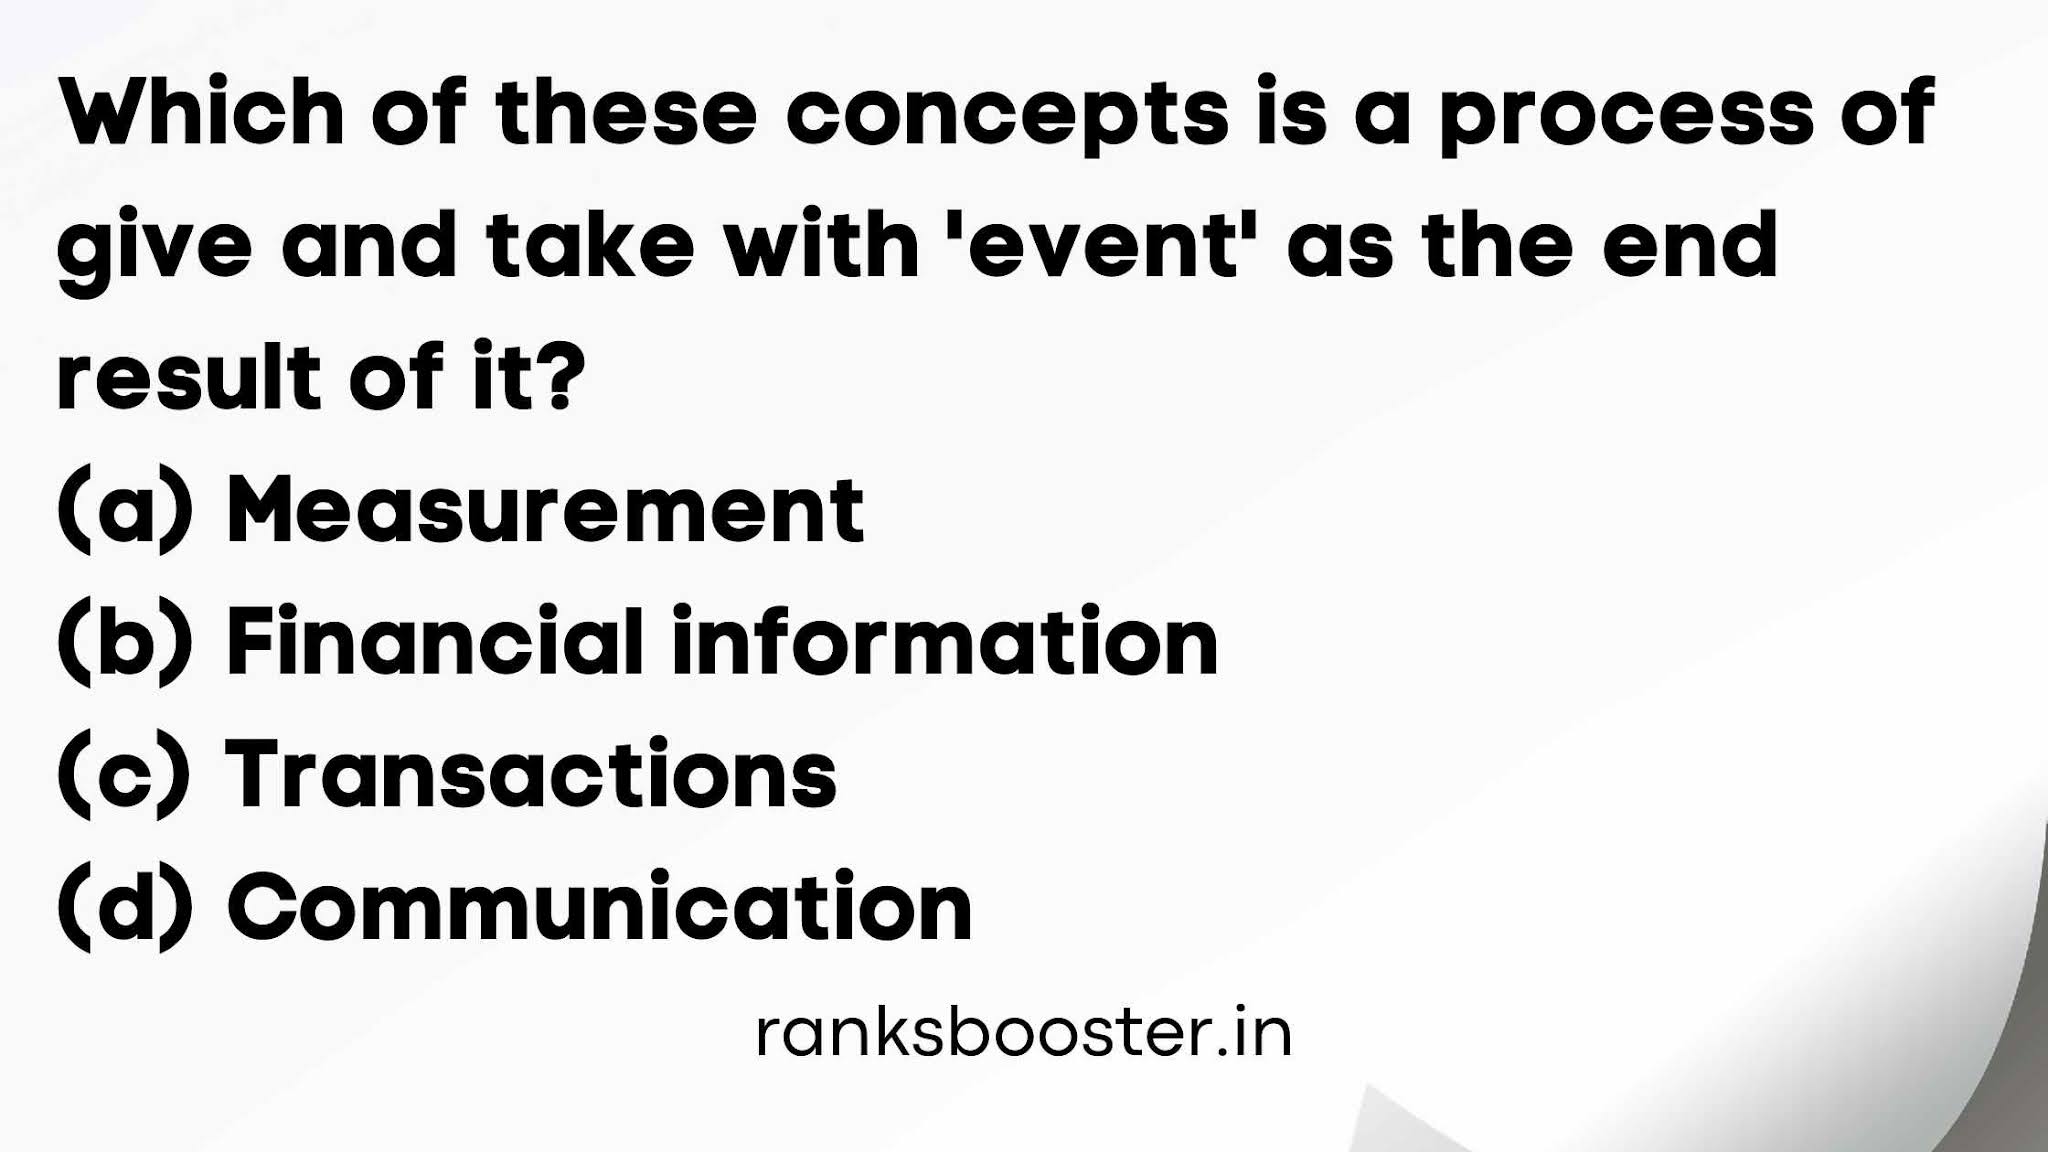 Which of these concepts is a process of give and take with 'event' as the end result of it? (a) Measurement (b) Financial information (c) Transactions (d) Communication